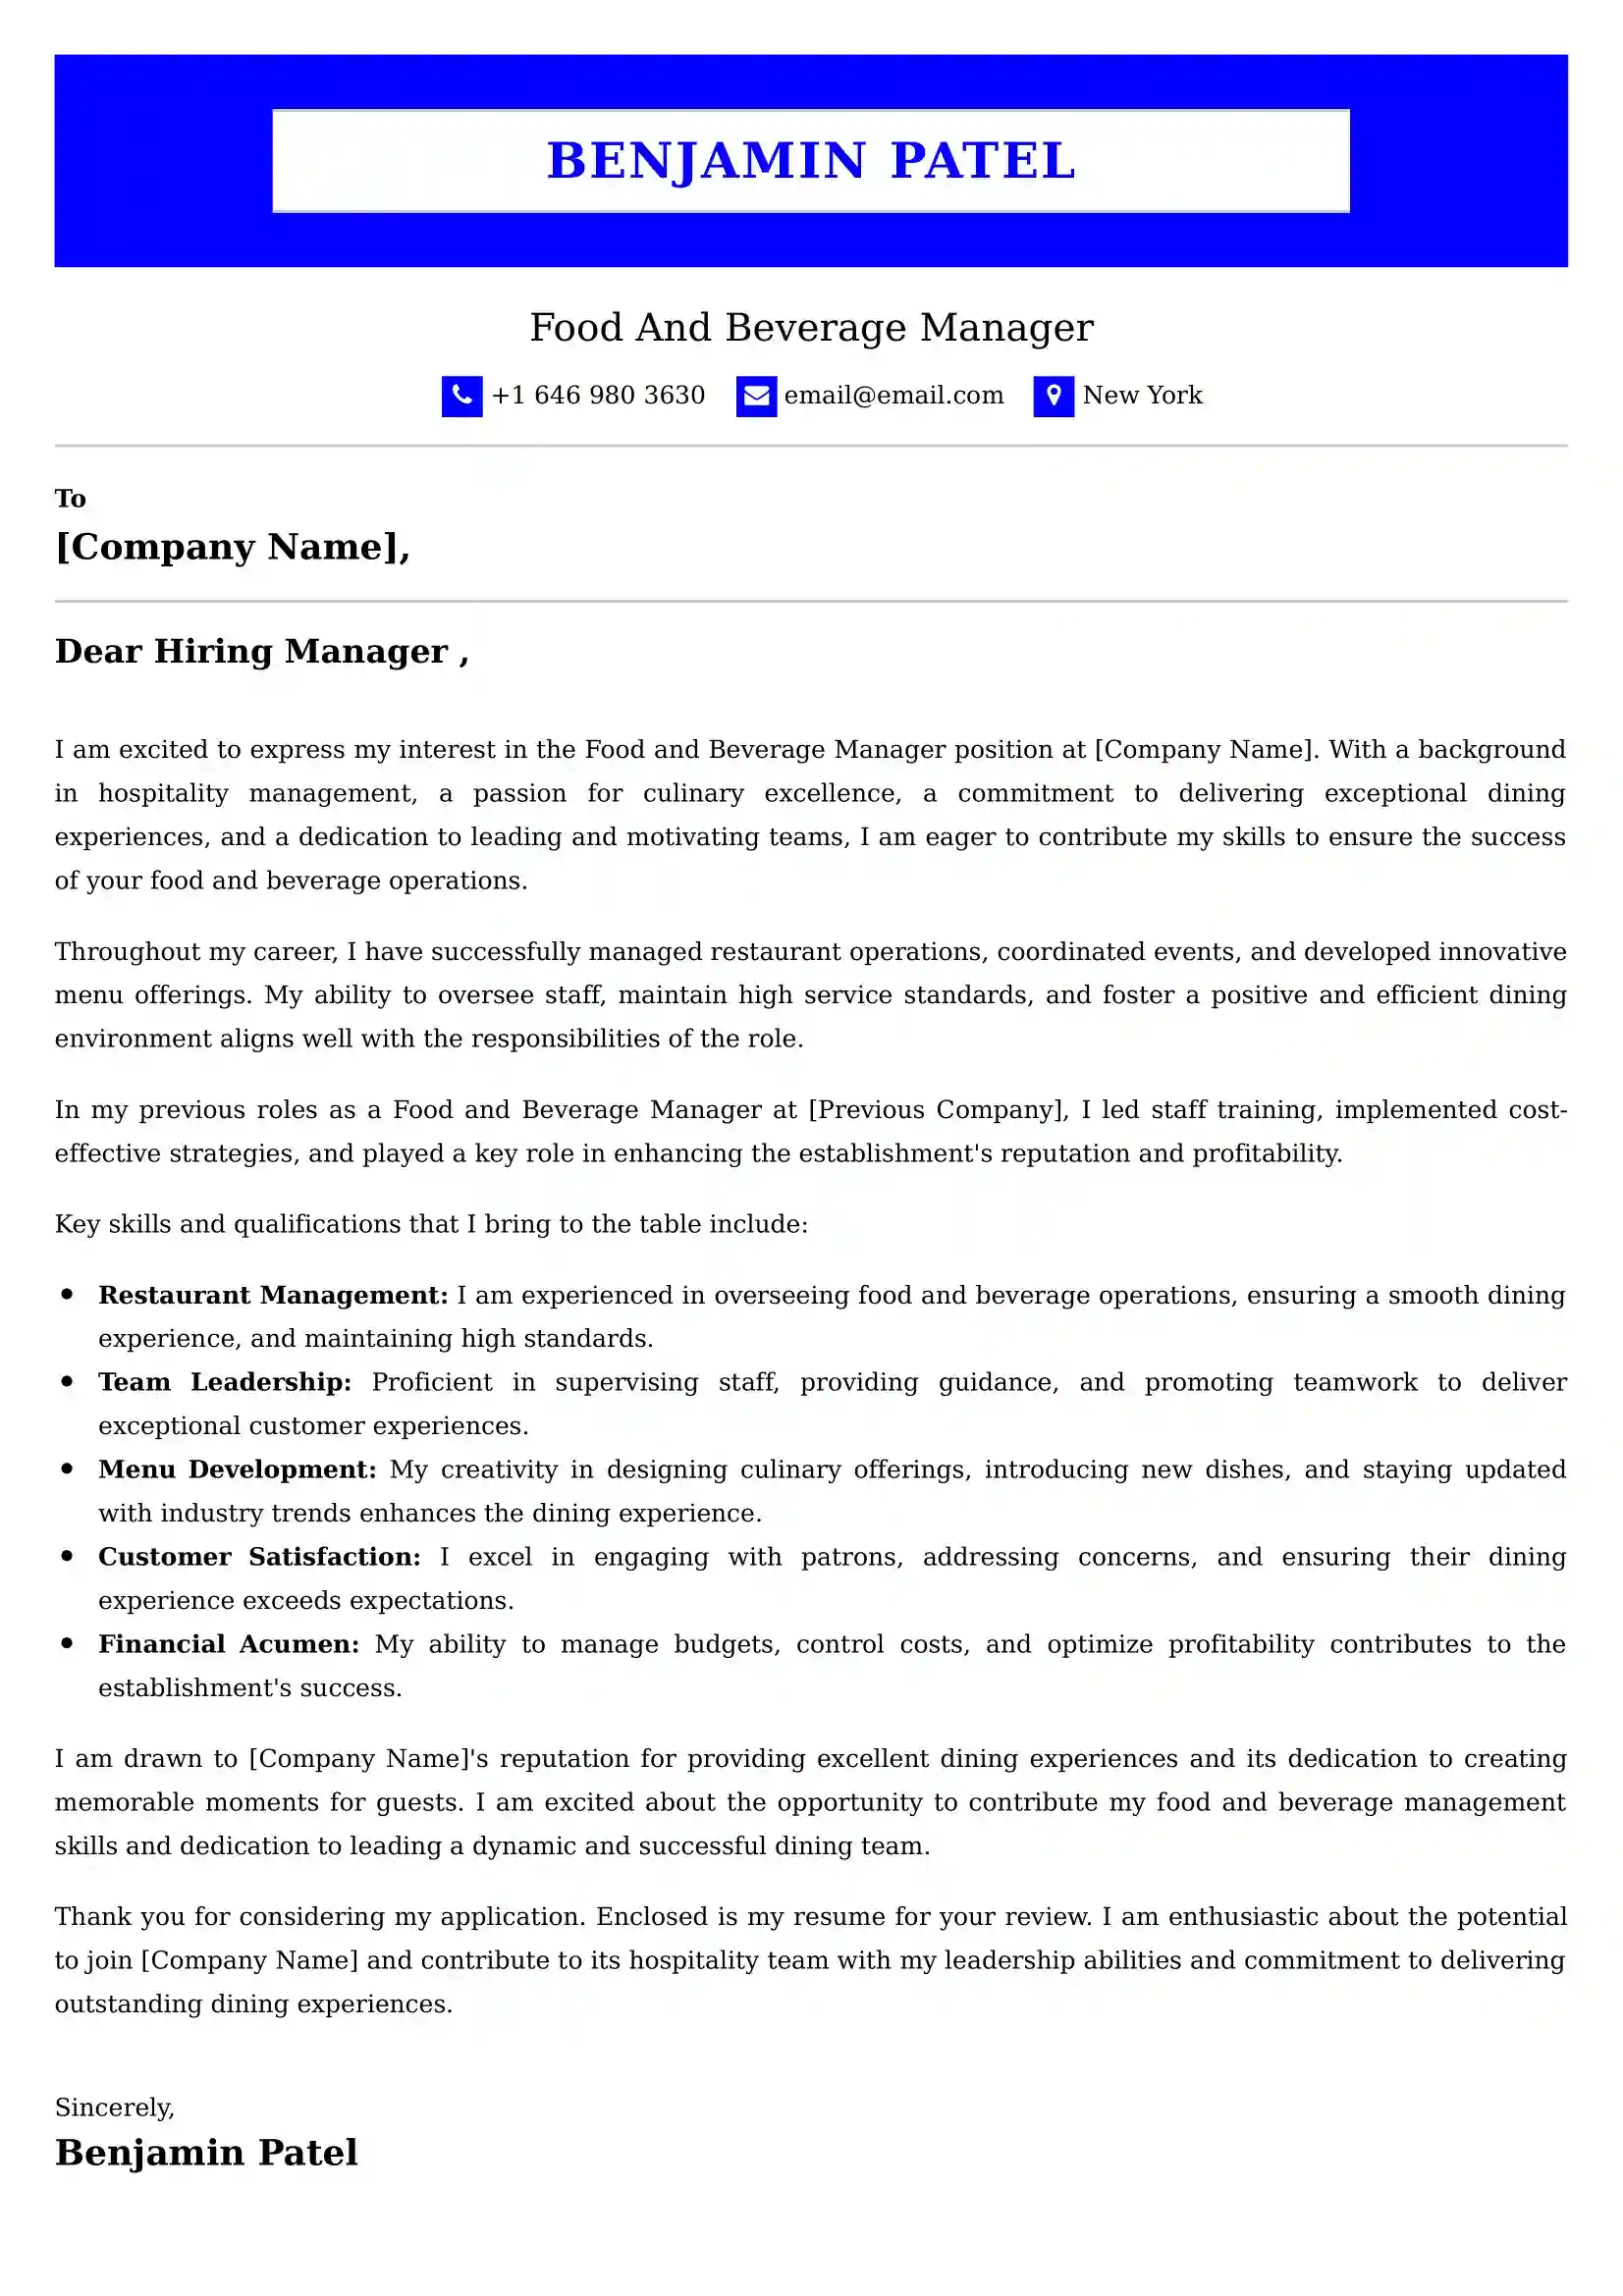 Food And Beverage Server Cover Letter Examples India